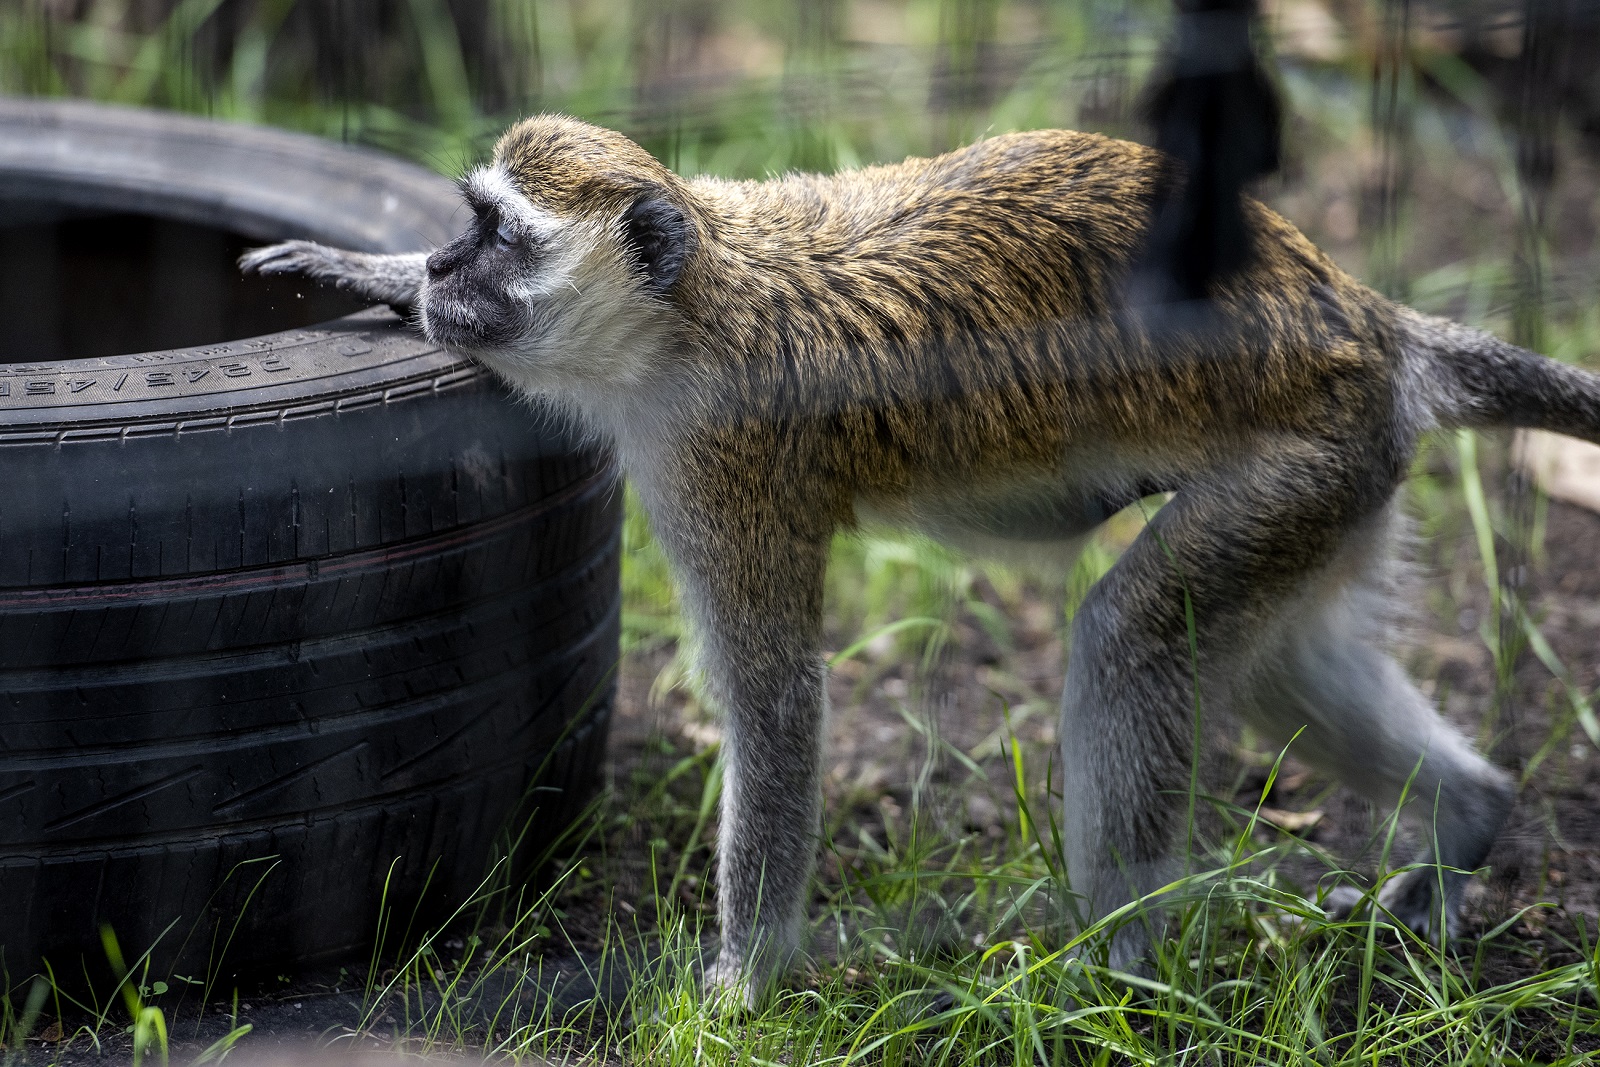 A monkey rests on a tire inside an enclosure Wednesday, June 30, 2021, in Westfield, Wis. 